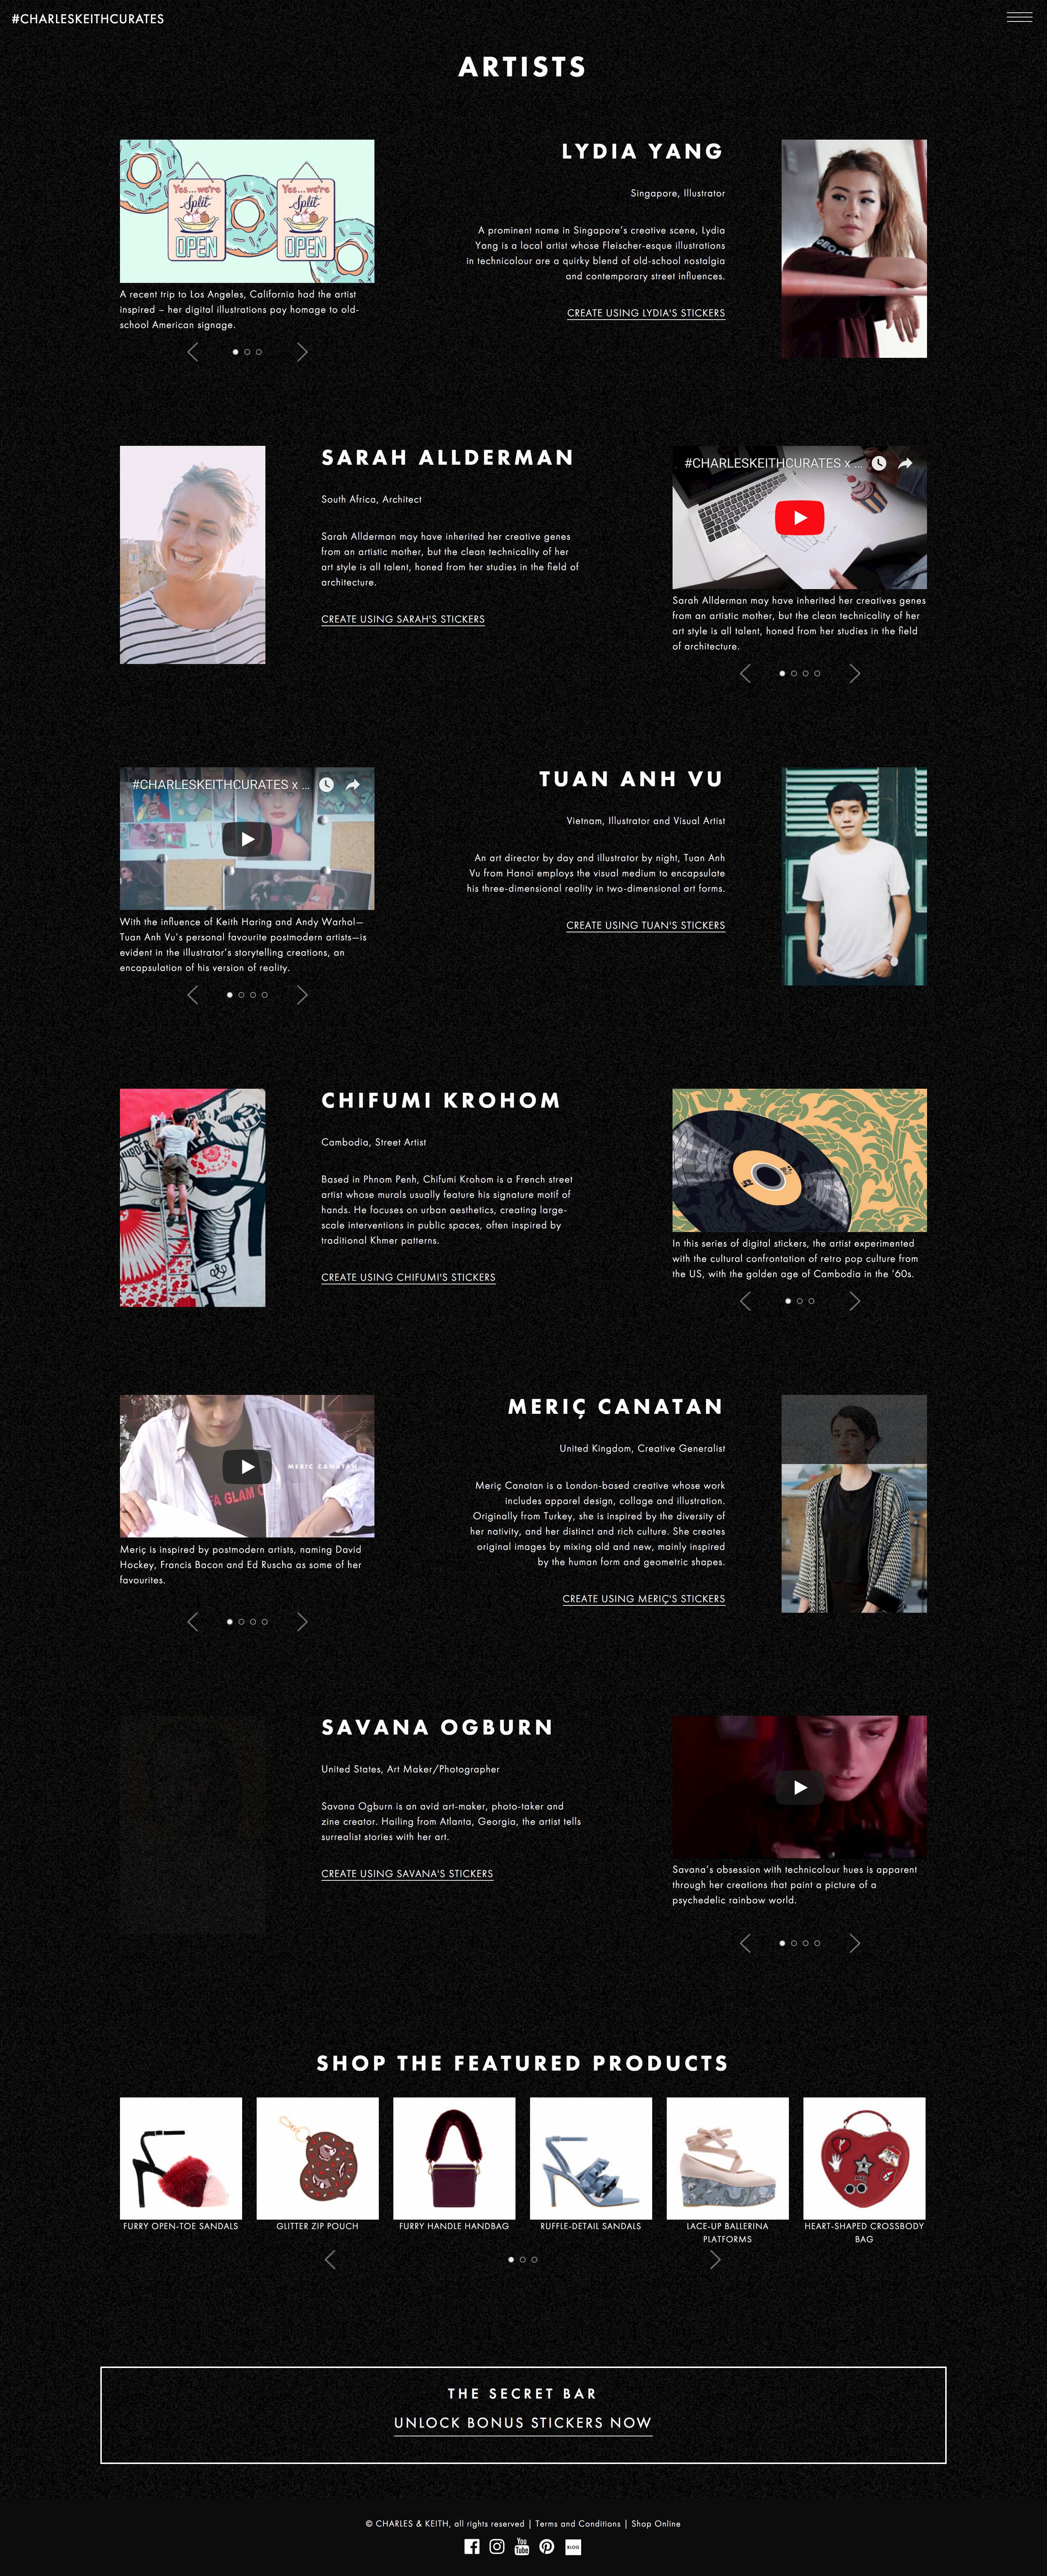 Artists Page